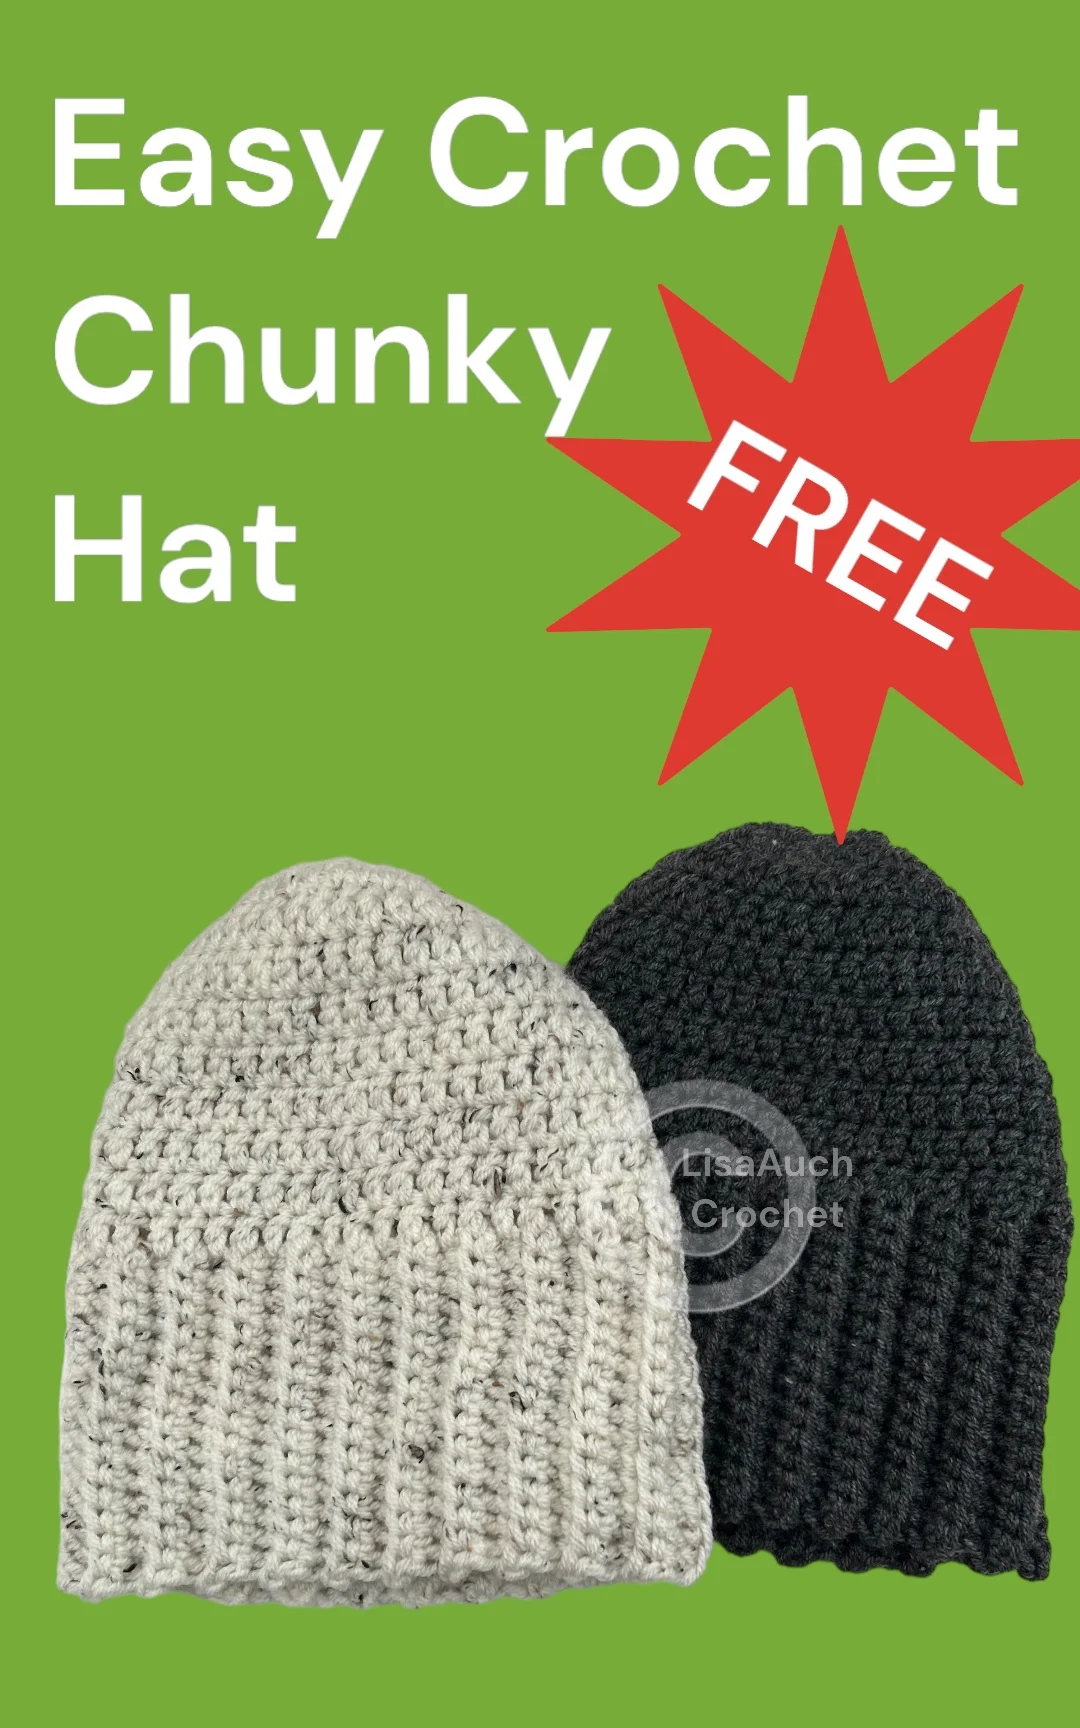 FREE crochet hat patterns for beginners, free crochet hat patterns for beginners, free crochet hat patterns easy,